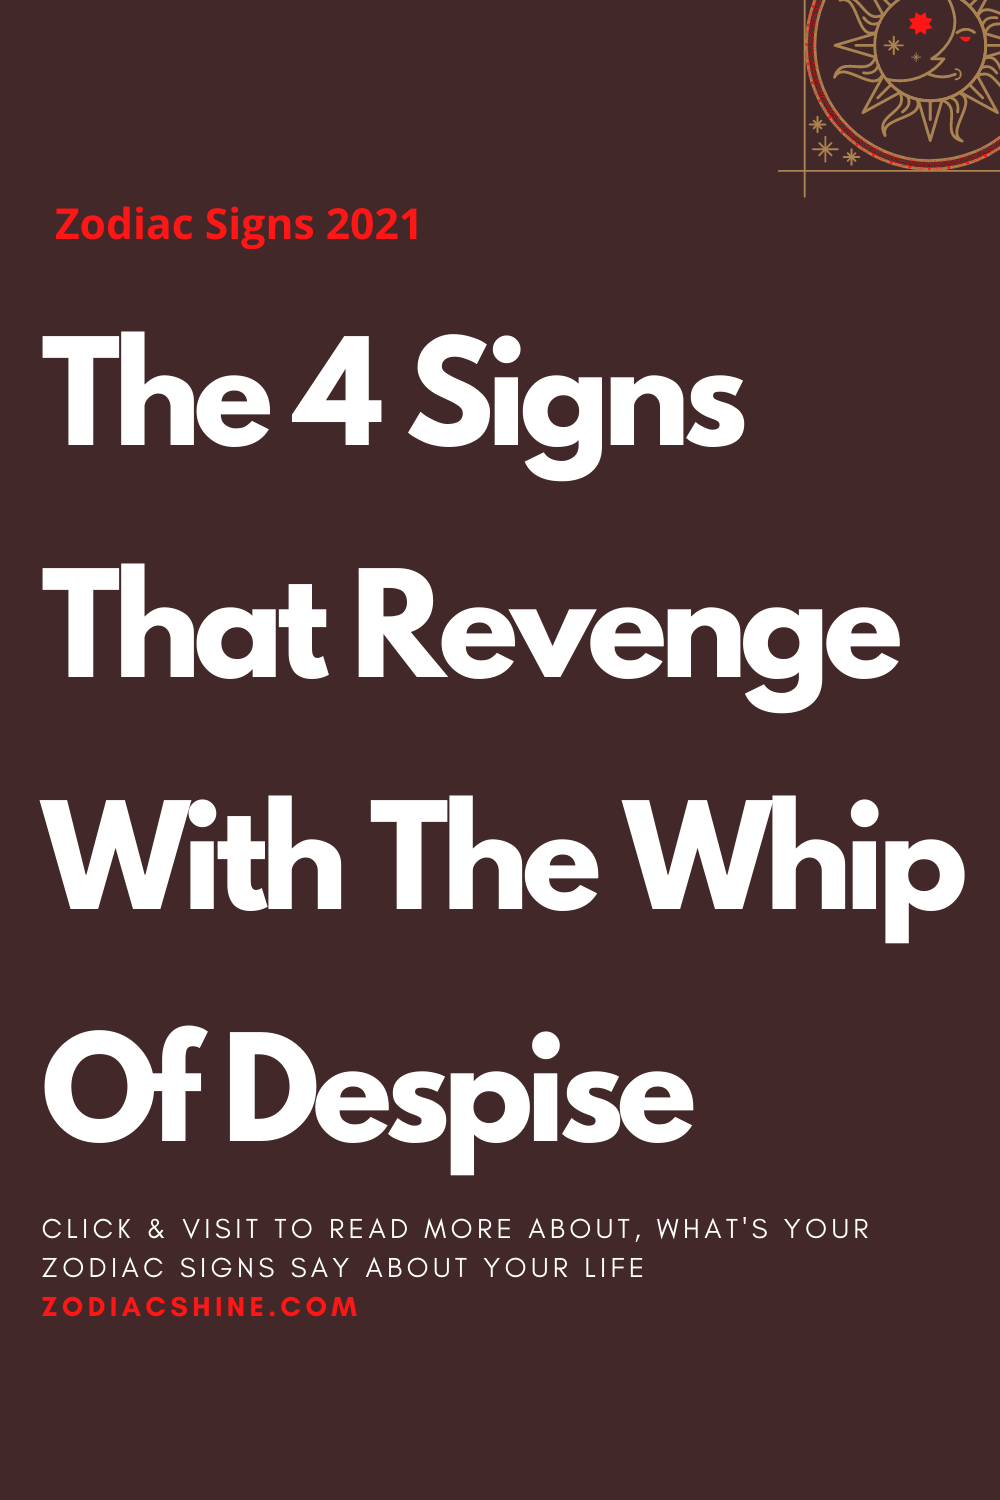 The 4 Signs That Revenge With The Whip Of Despise